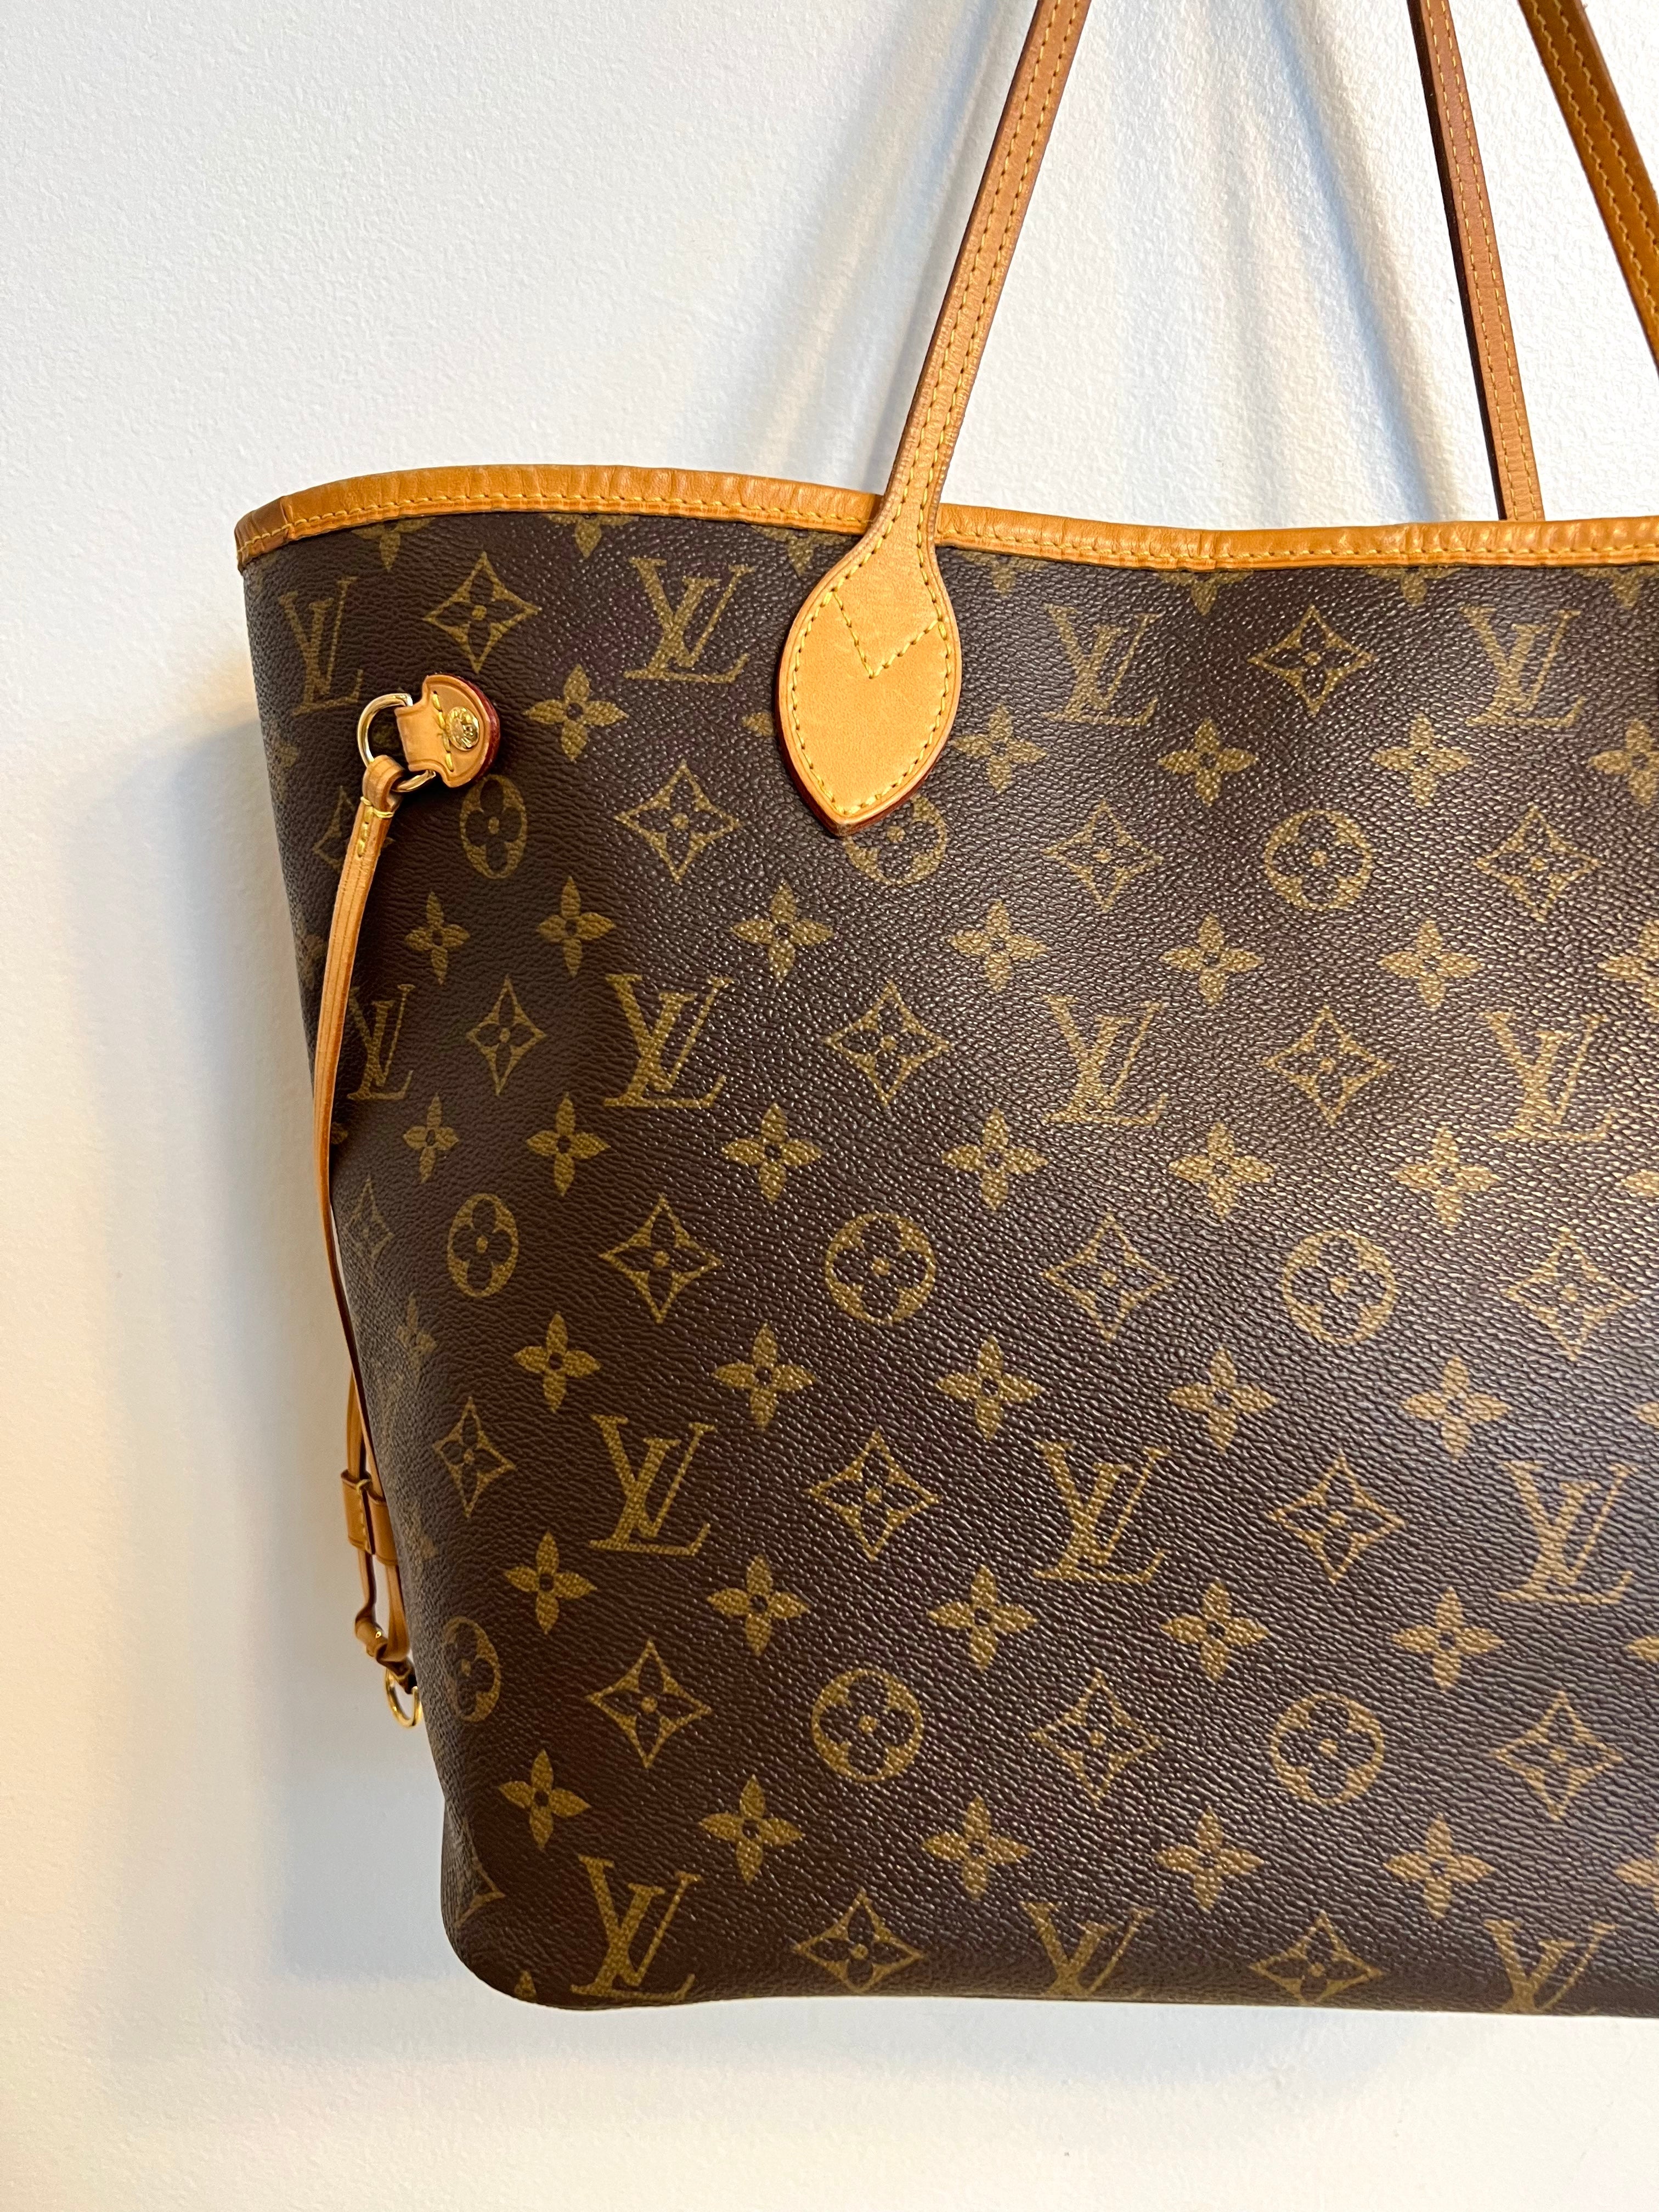 Pre-Owned LOUIS VUITTON Monogram Neverfull MM #1